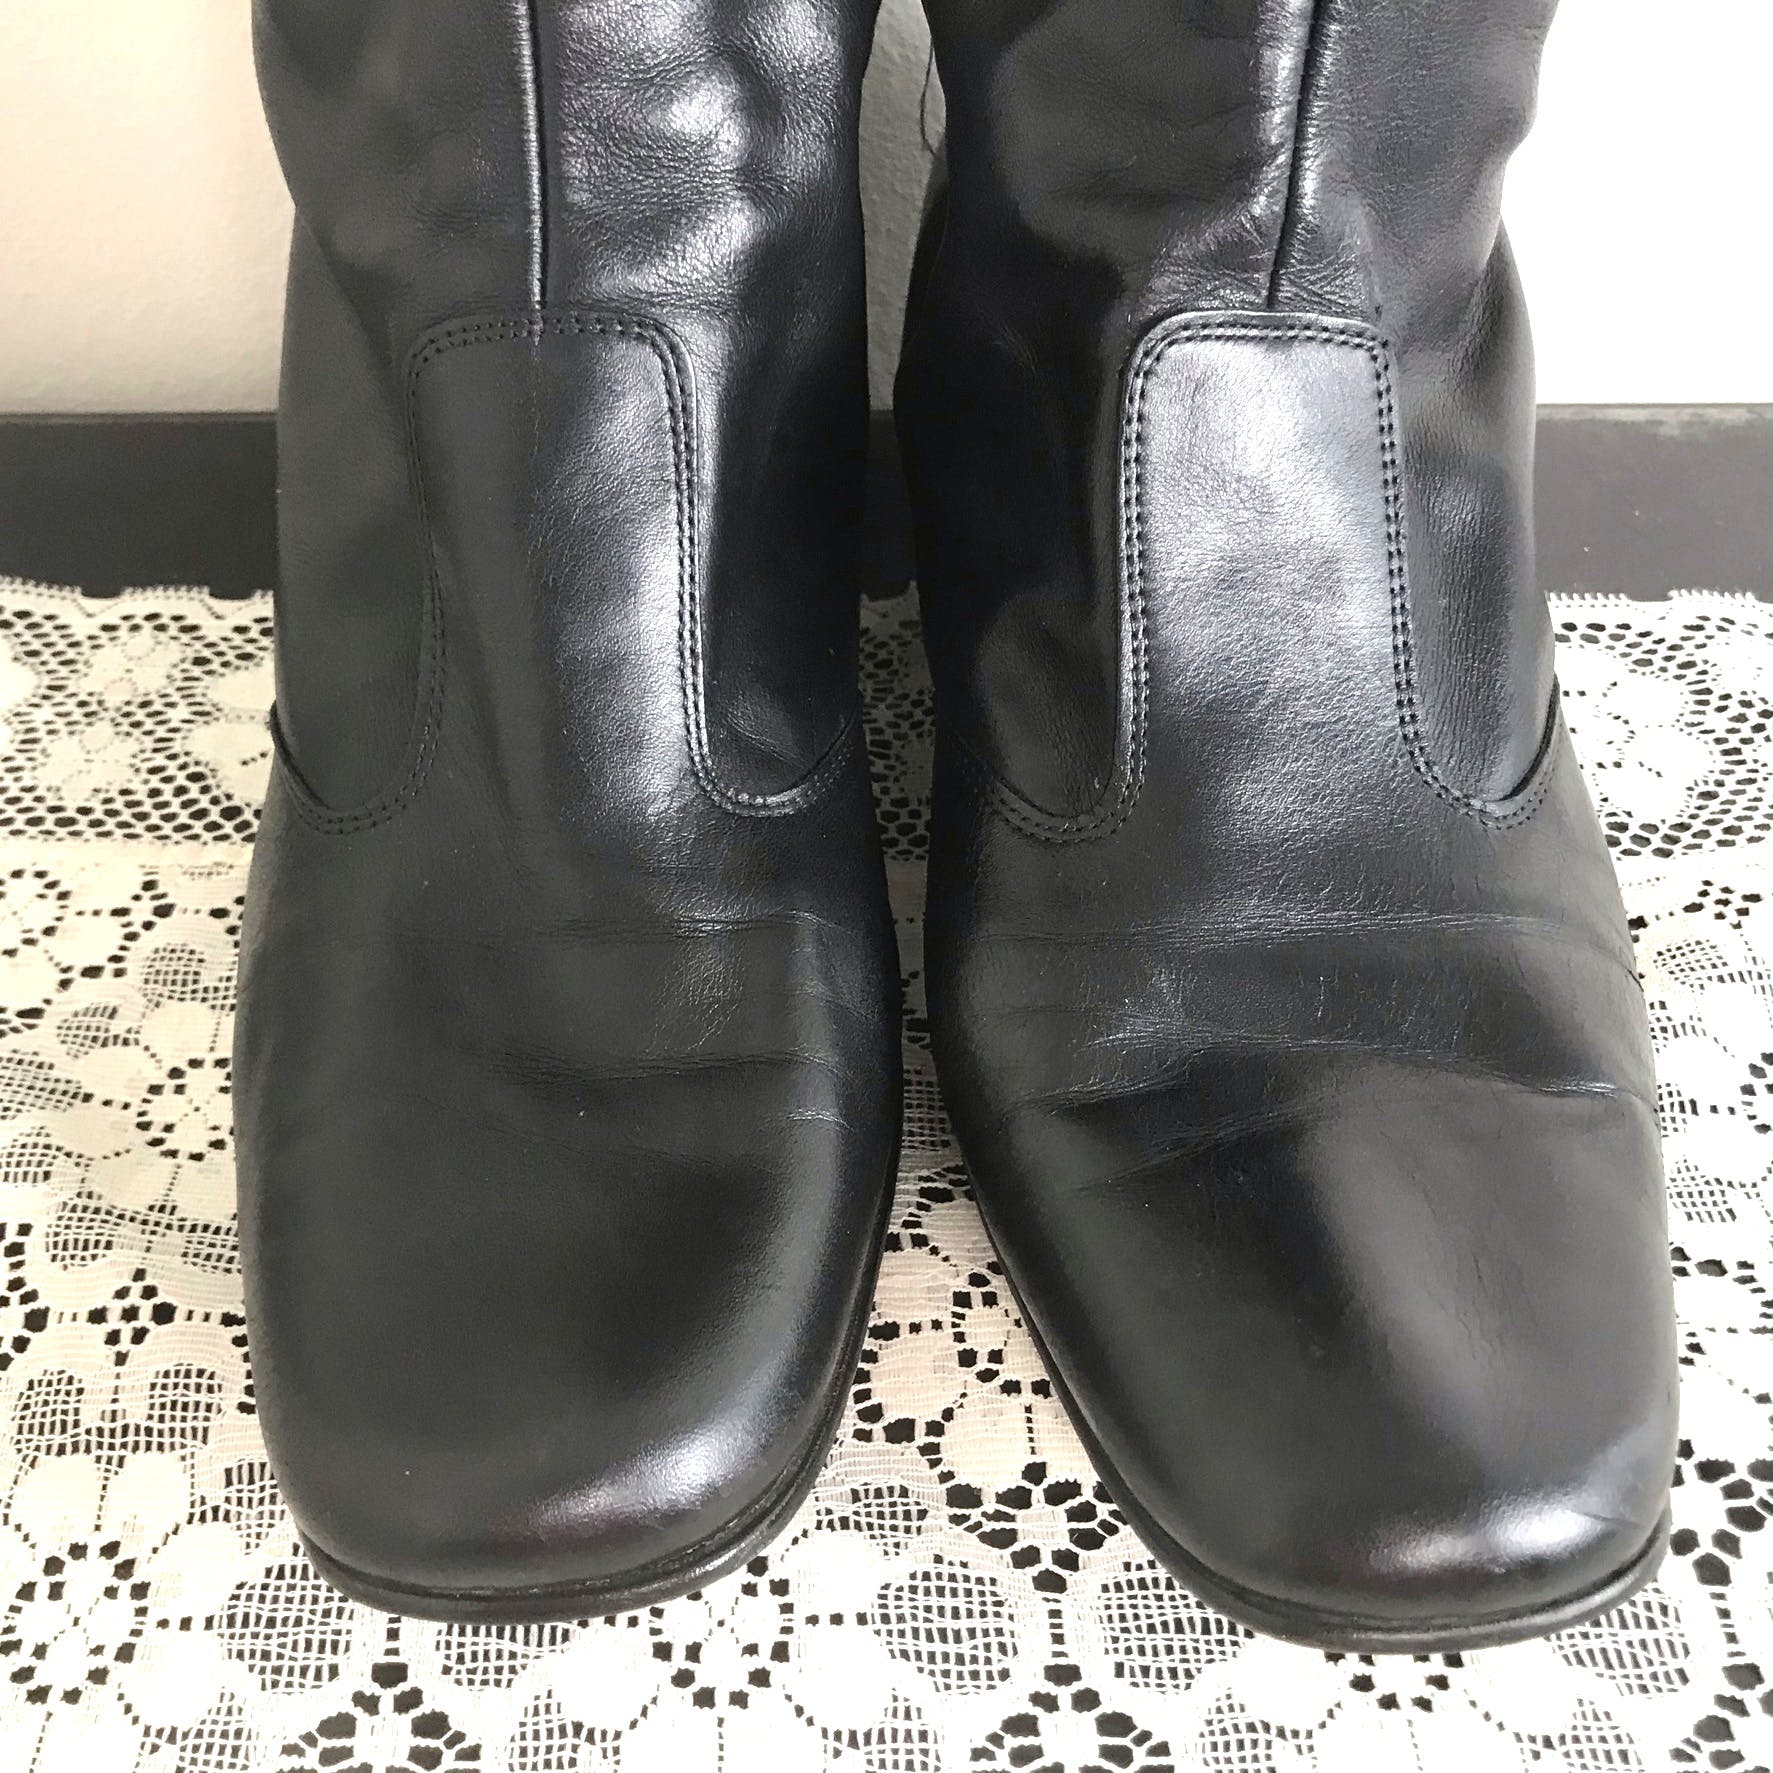 Vintage 70's Knee High Black Leather Go-Go Boots by Selby | Shop THRILLING